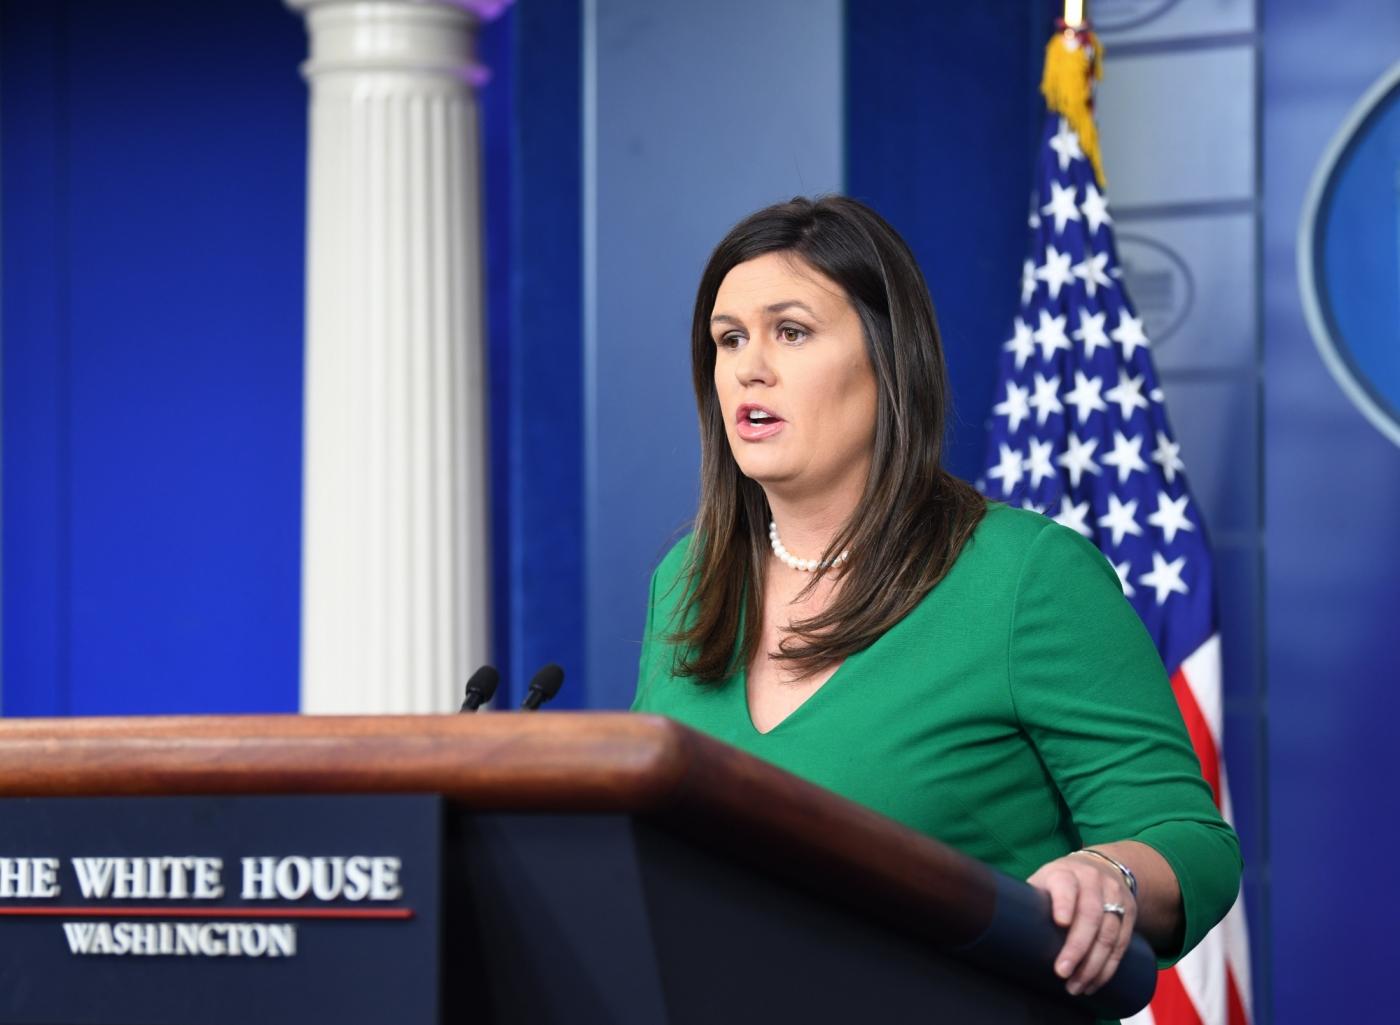 WASHINGTON, Aug. 15, 2018 (Xinhua) -- White House spokesperson Sarah Sanders attends a press briefing at the White House in Washington D.C., the United States, on Aug. 15, 2018. The White House said on Wednesday that the United States will not lift sanctions on Turkish steel and aluminum products even if detained American pastor Andrew Brunson is released. (Xinhua/Liu Jie/IANS) by .